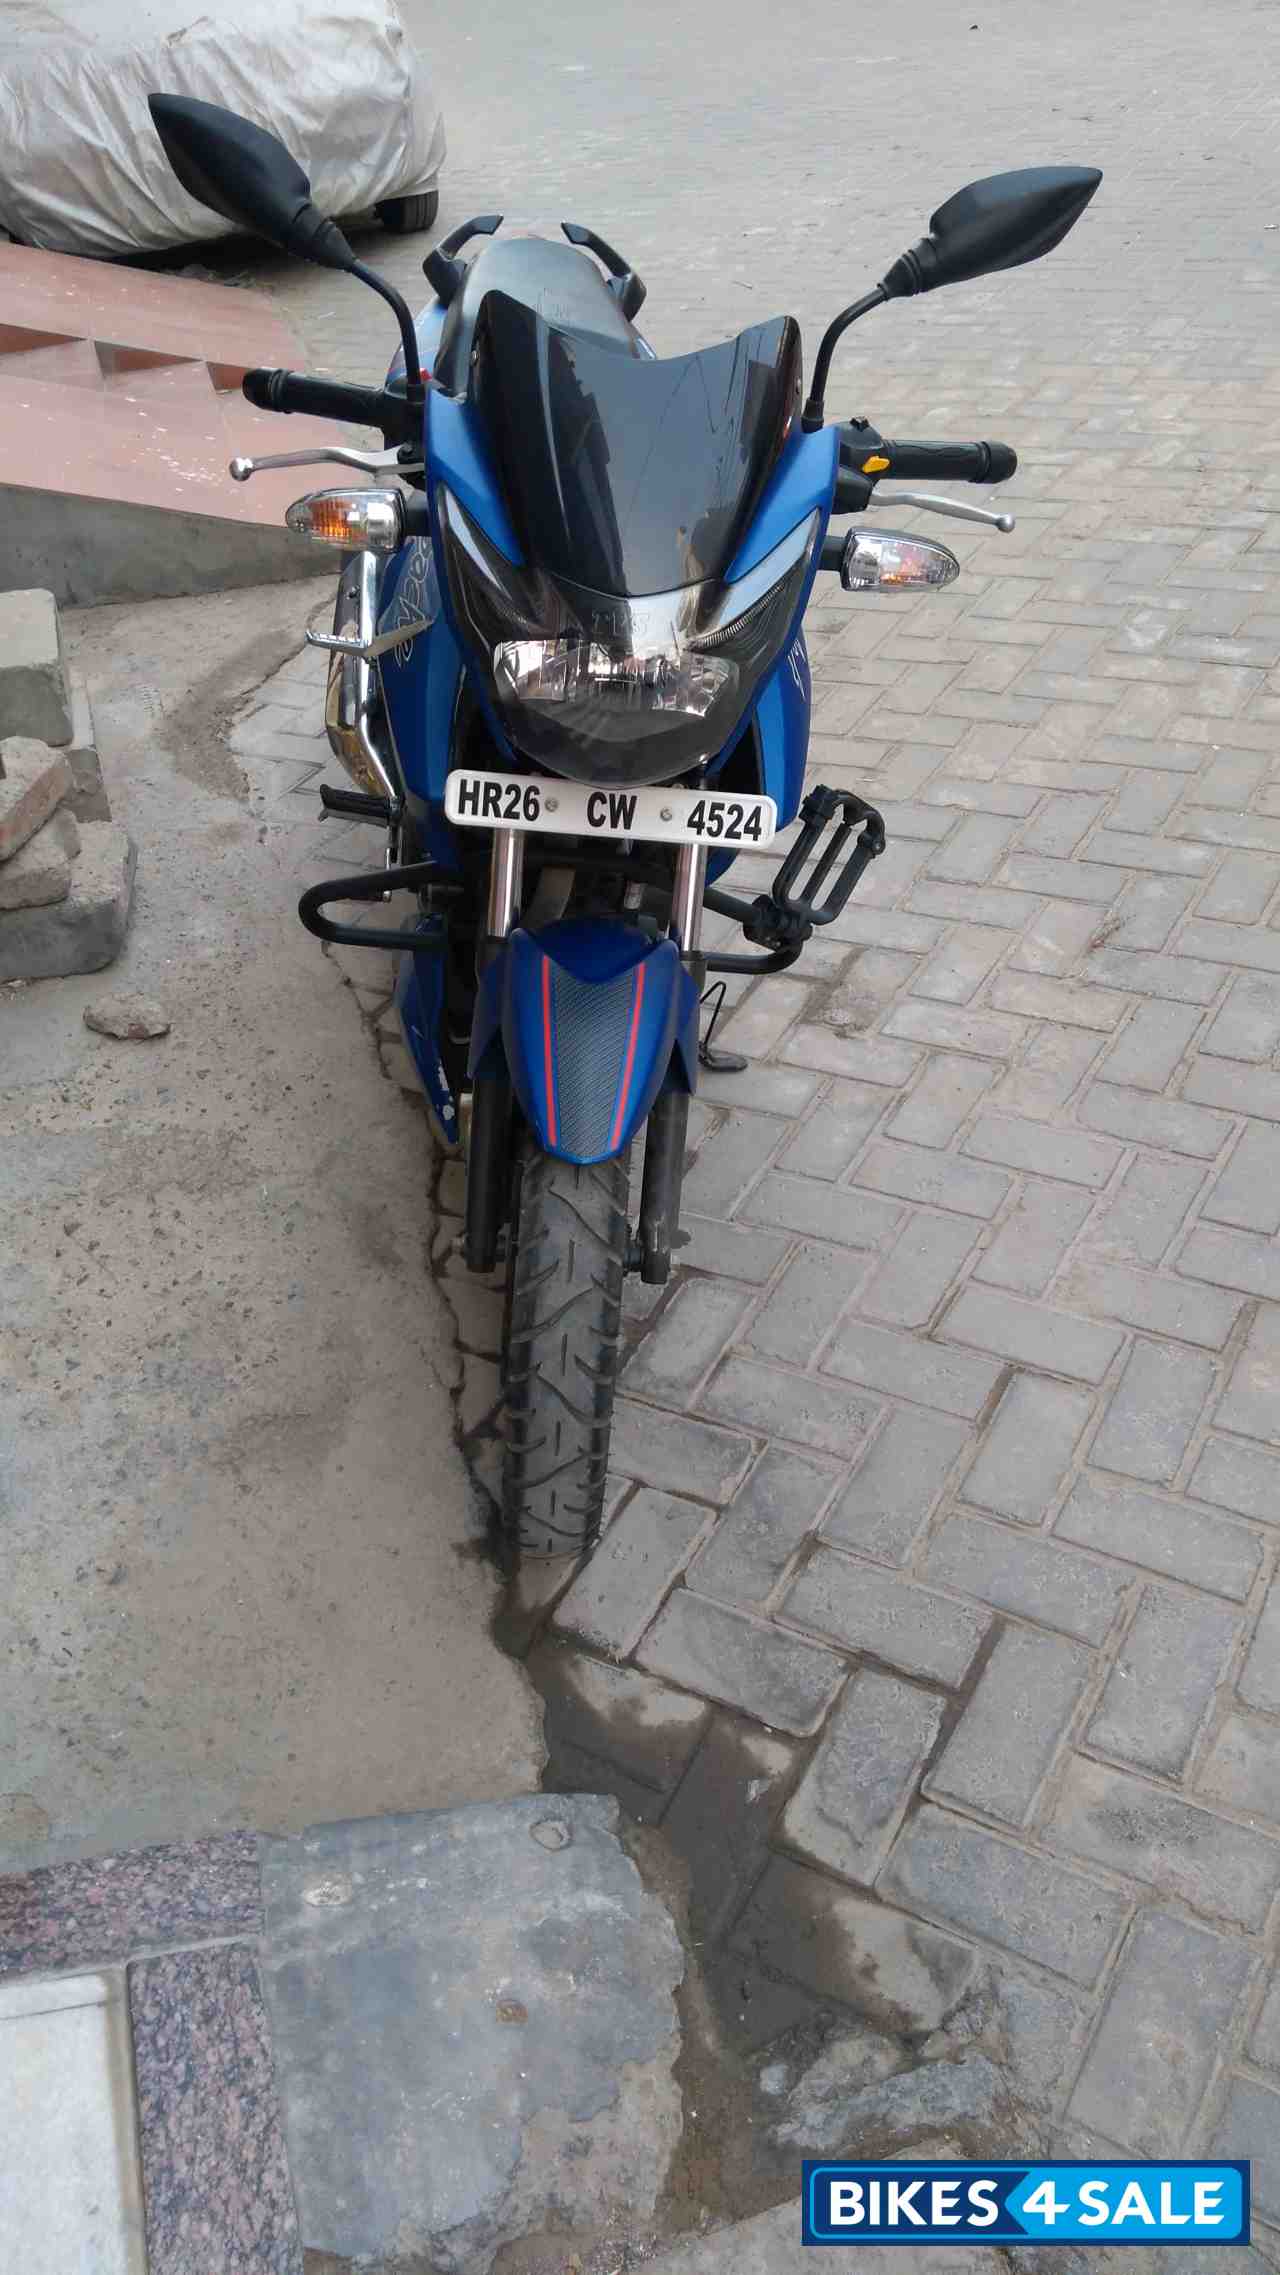 Used 2016 Model Tvs Apache Rtr 160 For Sale In Gurgaon Id 192518